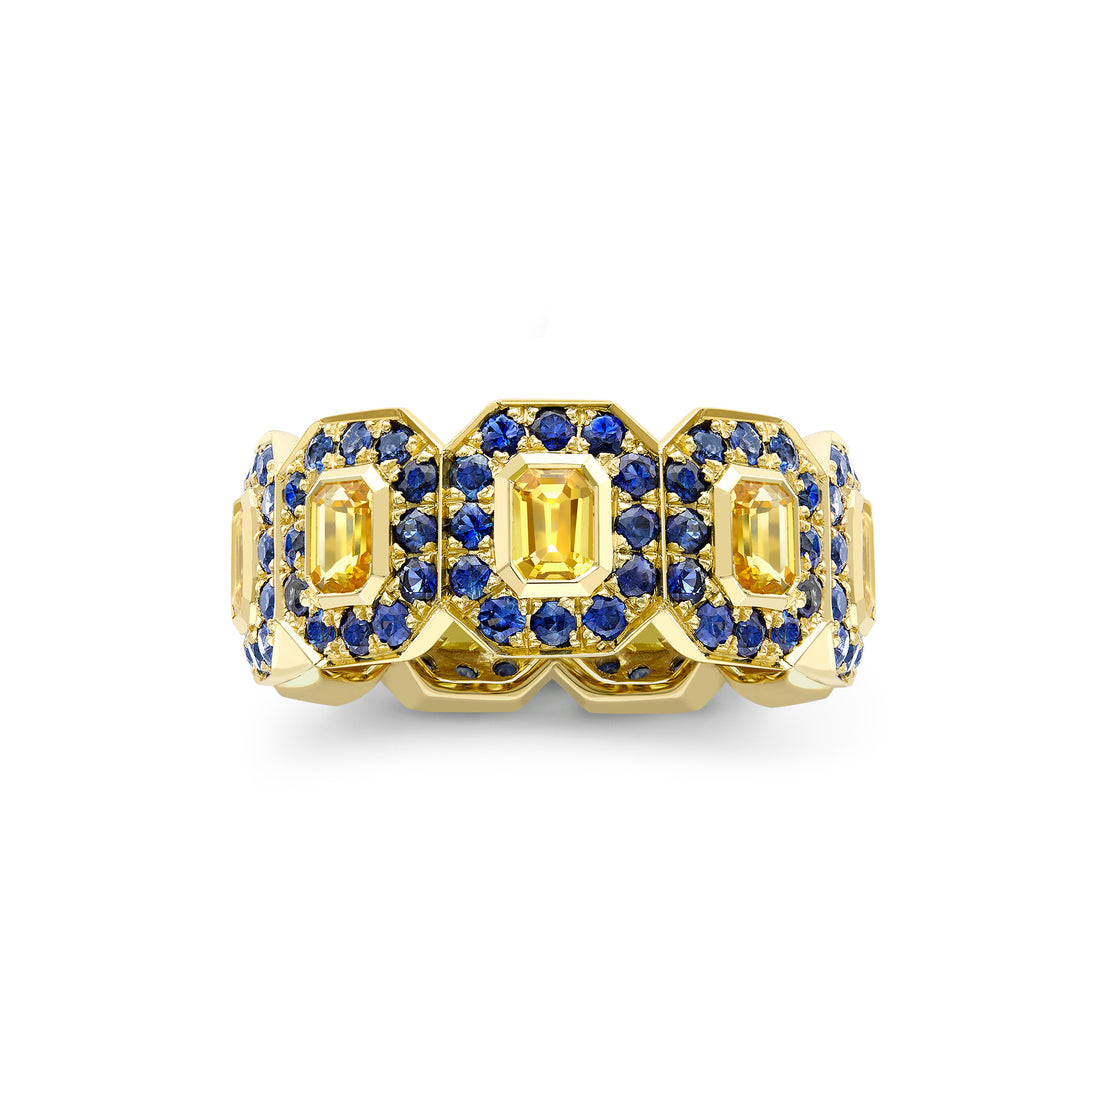  Yellow & Blue Sapphire Ring by Hattie Rickards | The Cut London